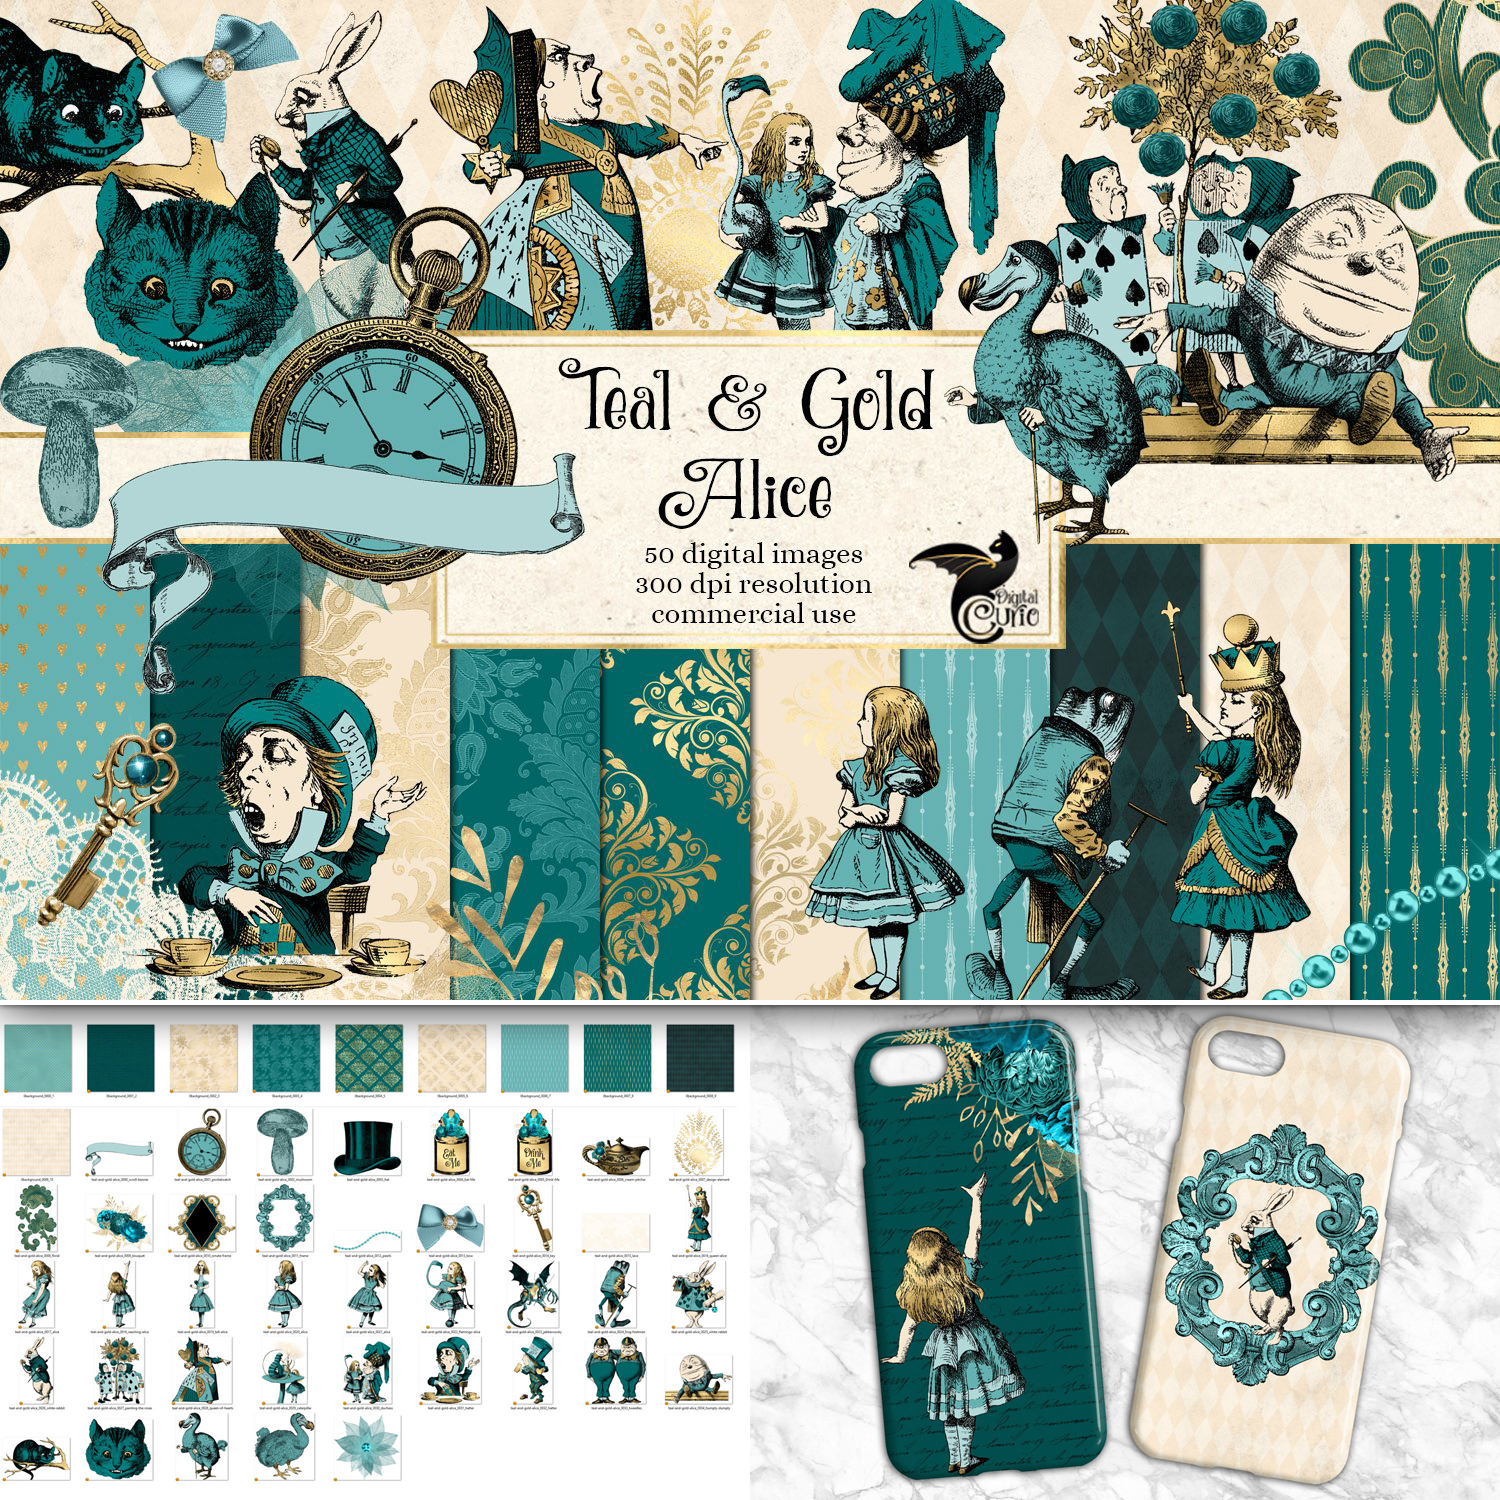 Preview teal and gold alice in wonderland graphics.